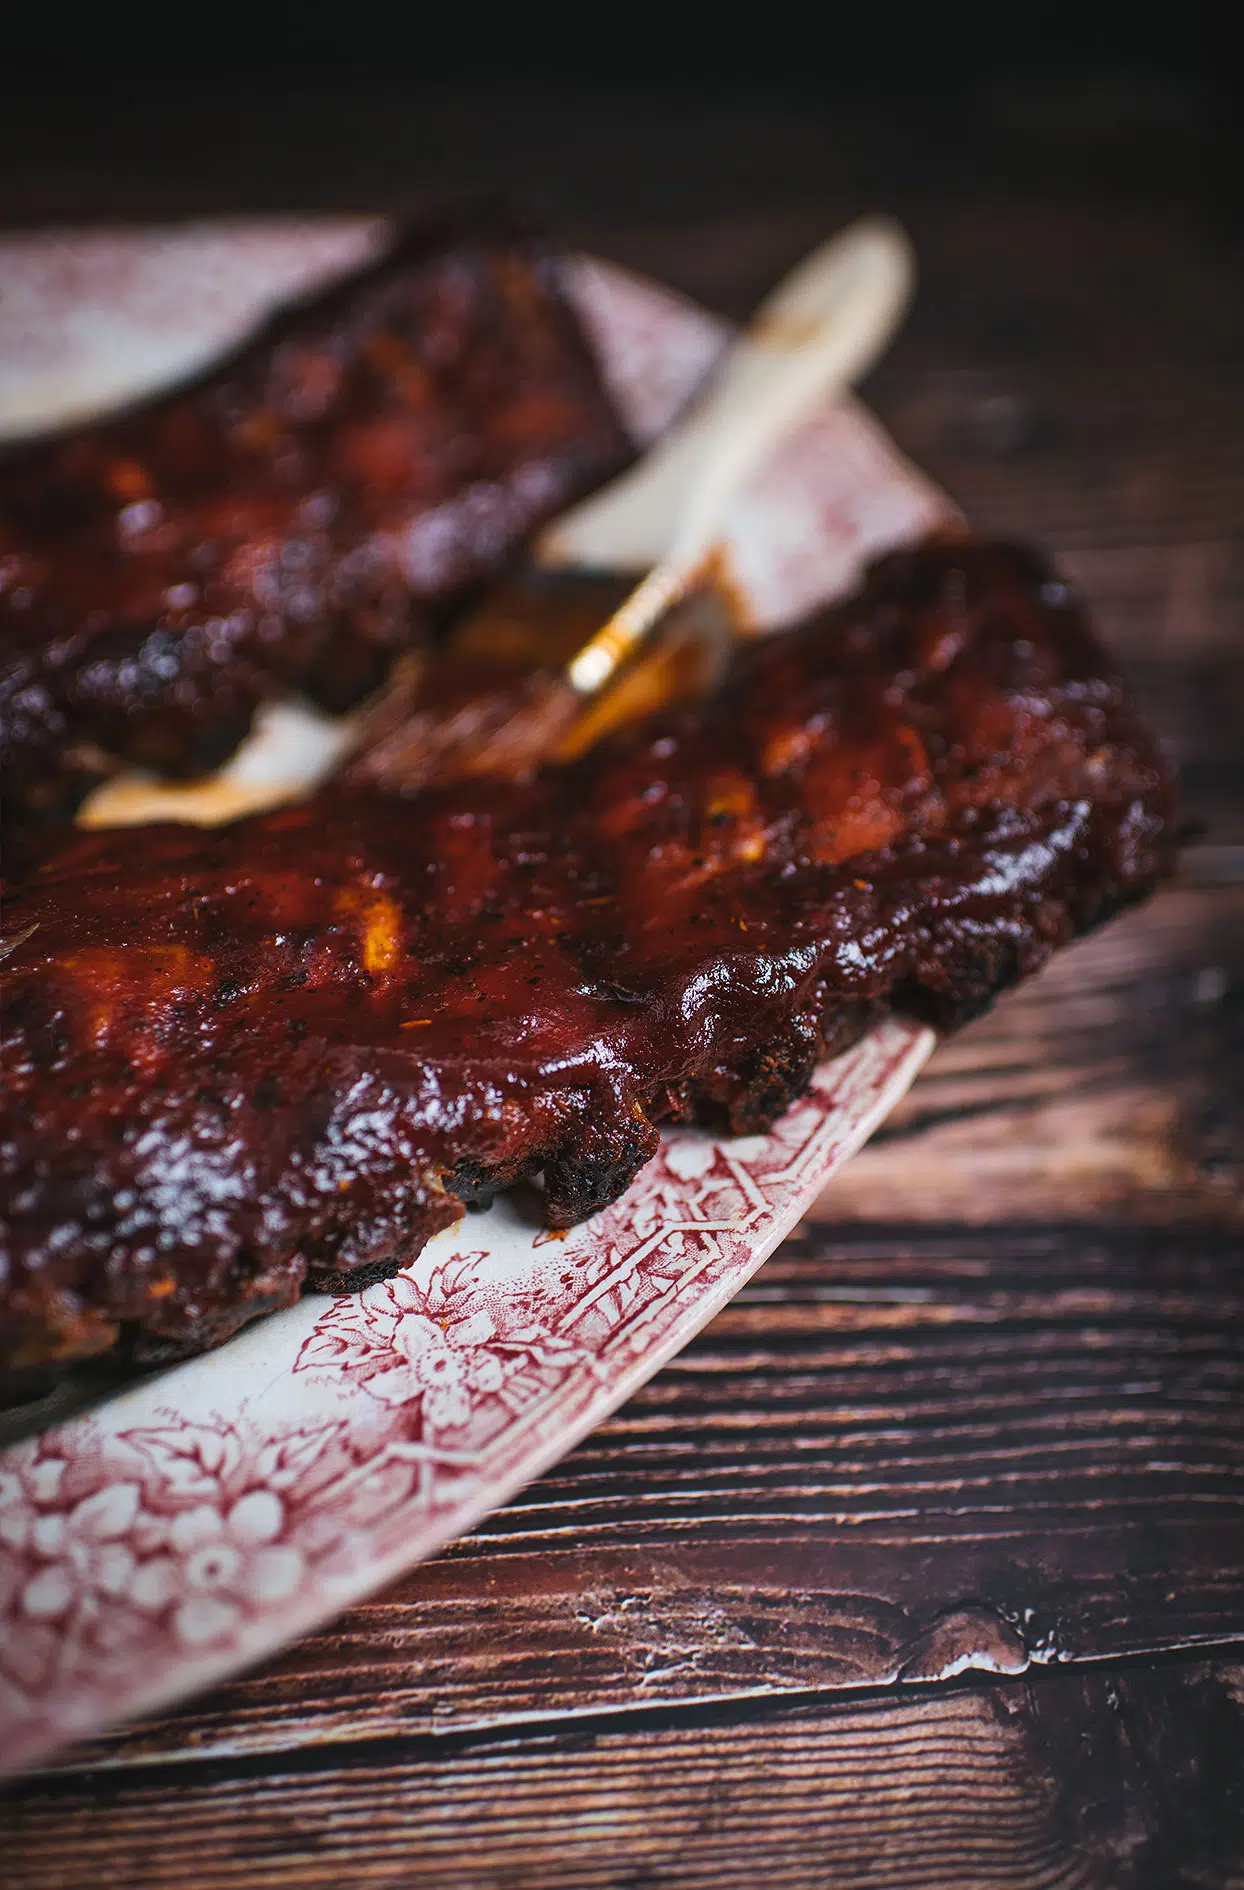 Maple and rum pork ribs